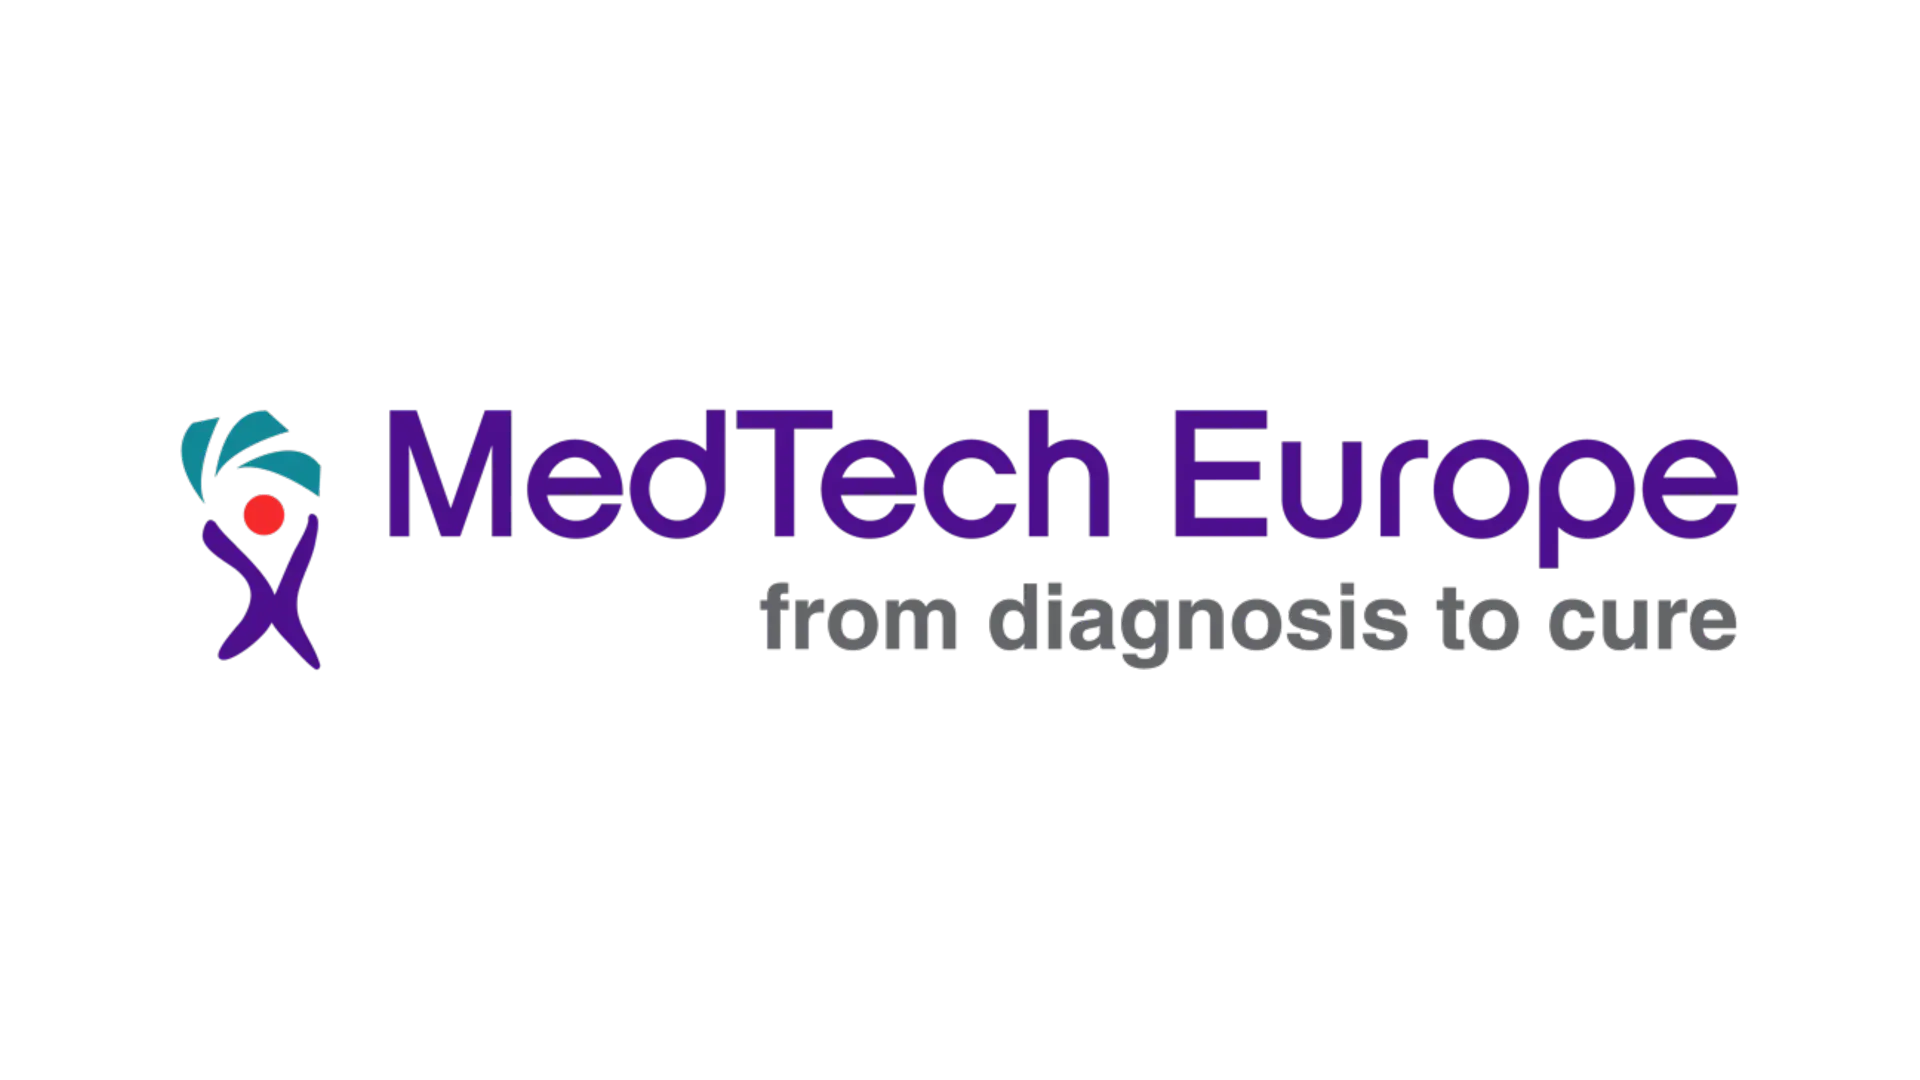 
Henkel has joined MedTech Europe to accelerate the adoption of innovative solutions, address industry challenges and contribute to advancing the medical technology sector.